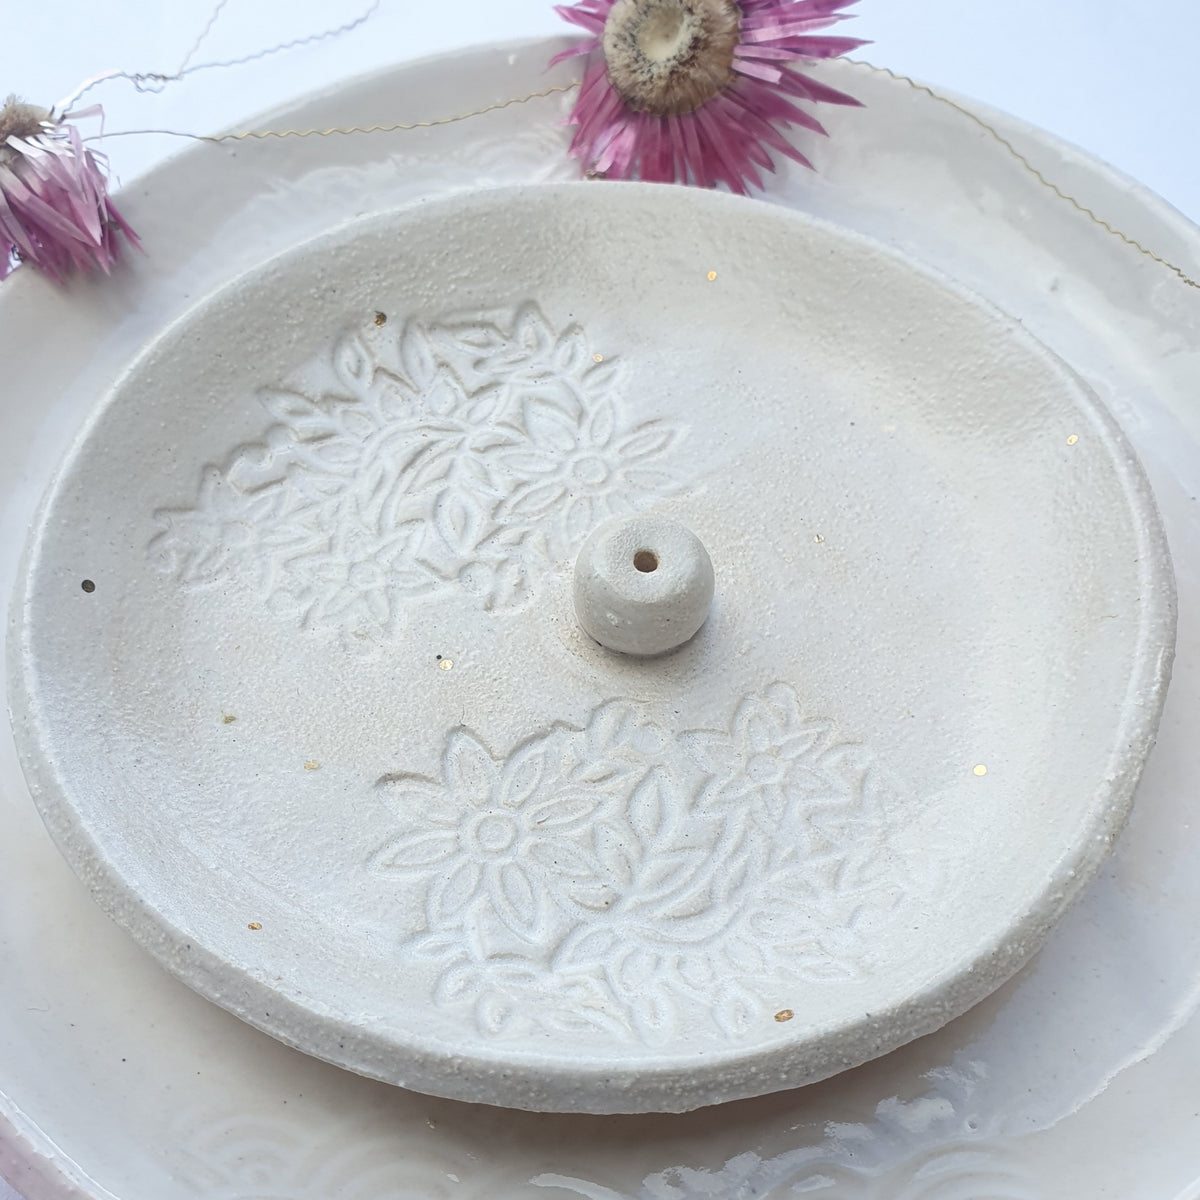 Small incense holder - White with botanical print